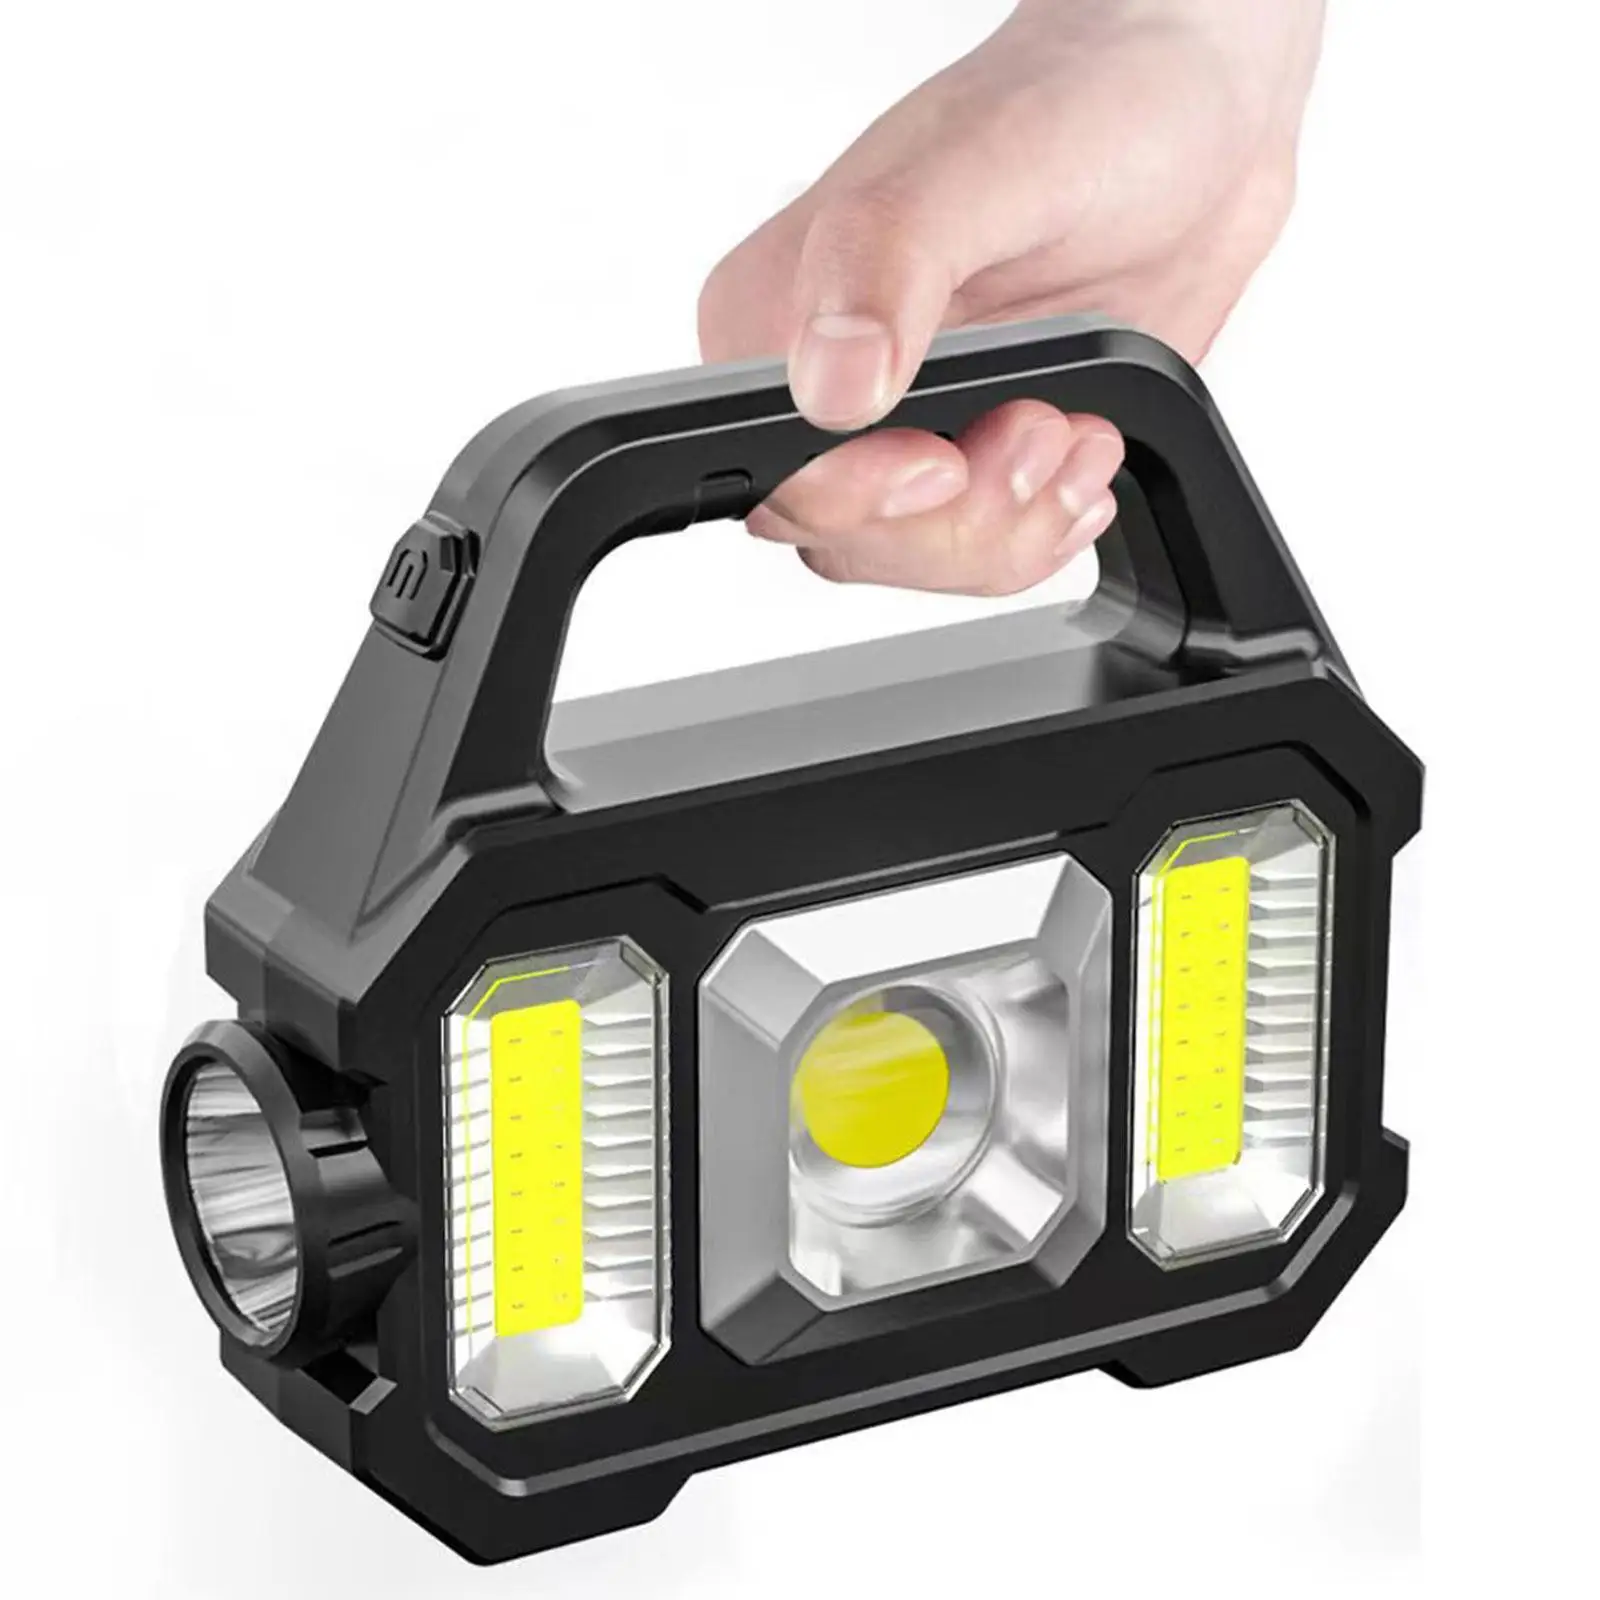 Handheld Searchlight Rechargeable Work Light Lamp Heavy Duty for Exploration Outdoor Emergencies Camping Fishing